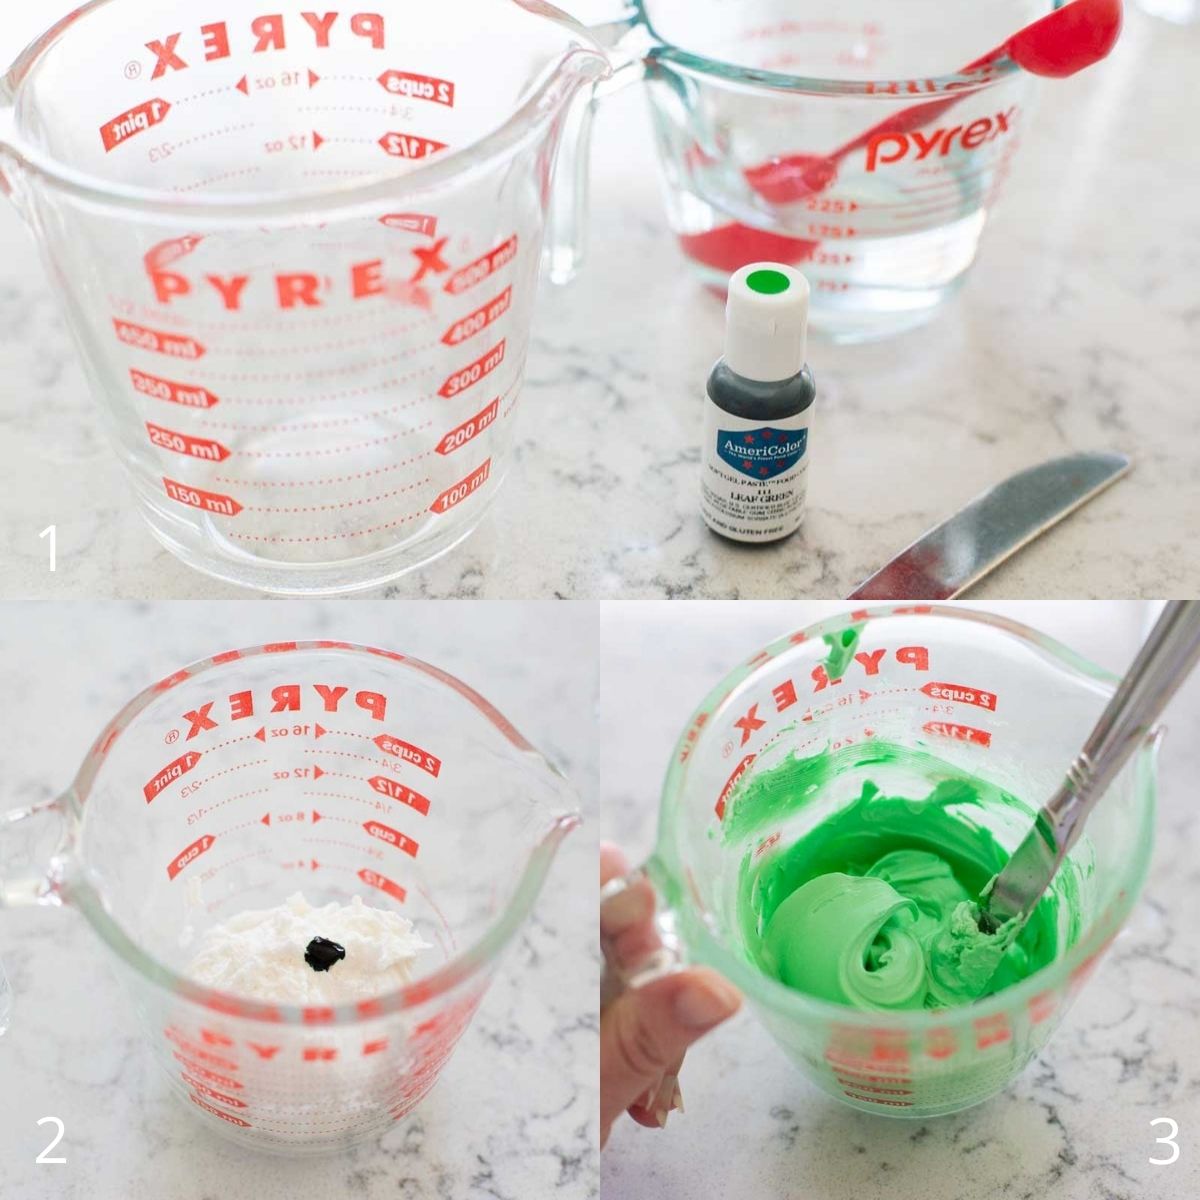 Step by step photo collage shows how to tint royal icing a light green color.